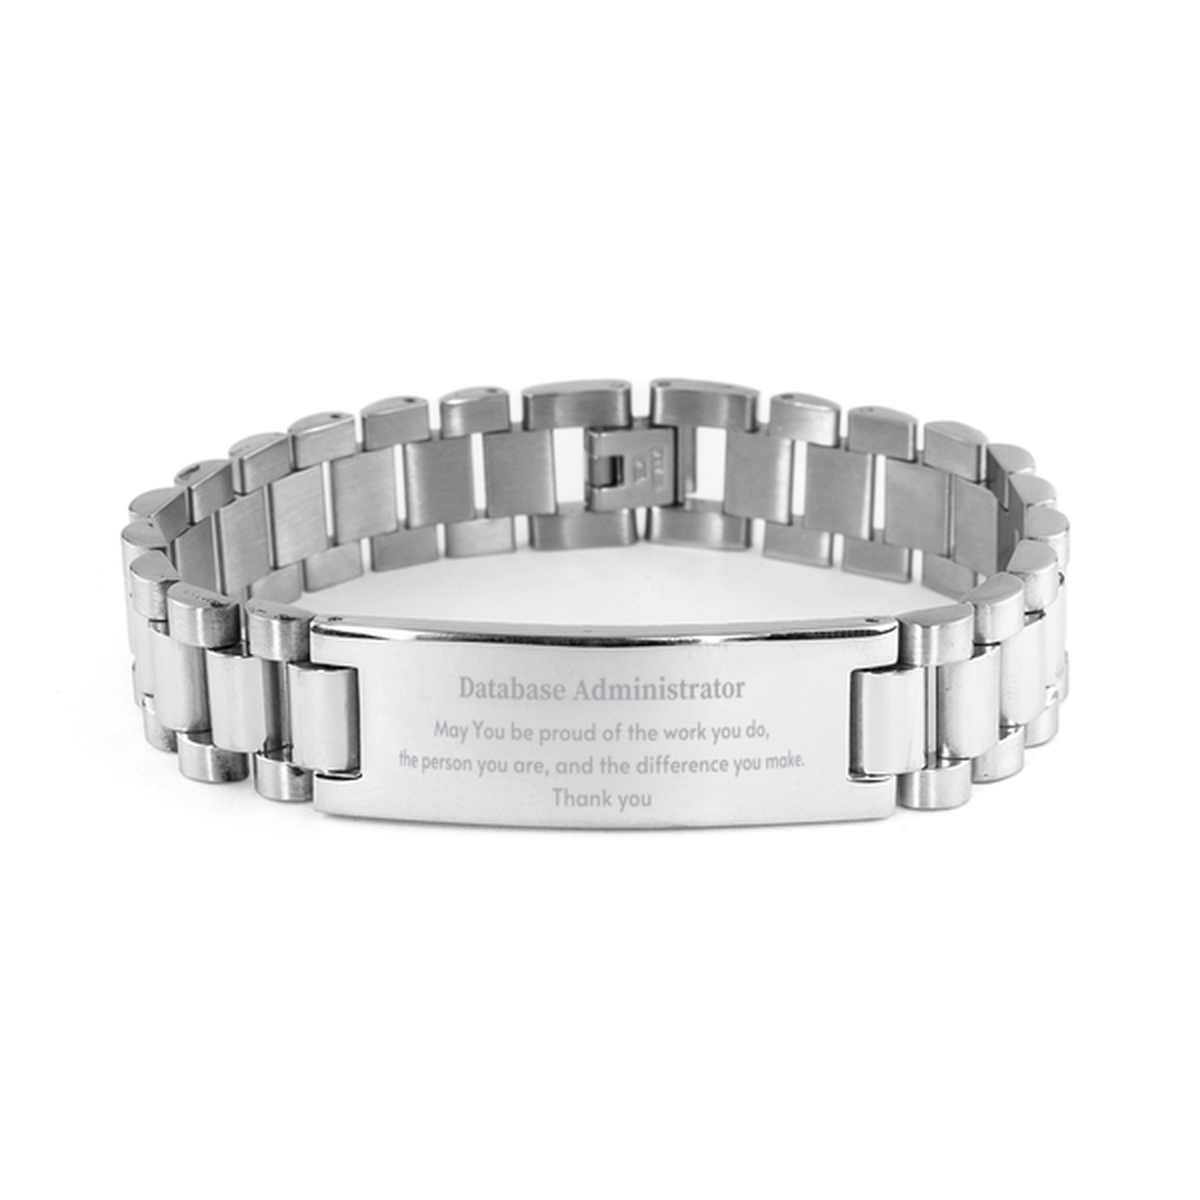 Heartwarming Ladder Stainless Steel Bracelet Retirement Coworkers Gifts for Database Administrator, Database Administrator May You be proud of the work you do, the person you are Gifts for Boss Men Women Friends